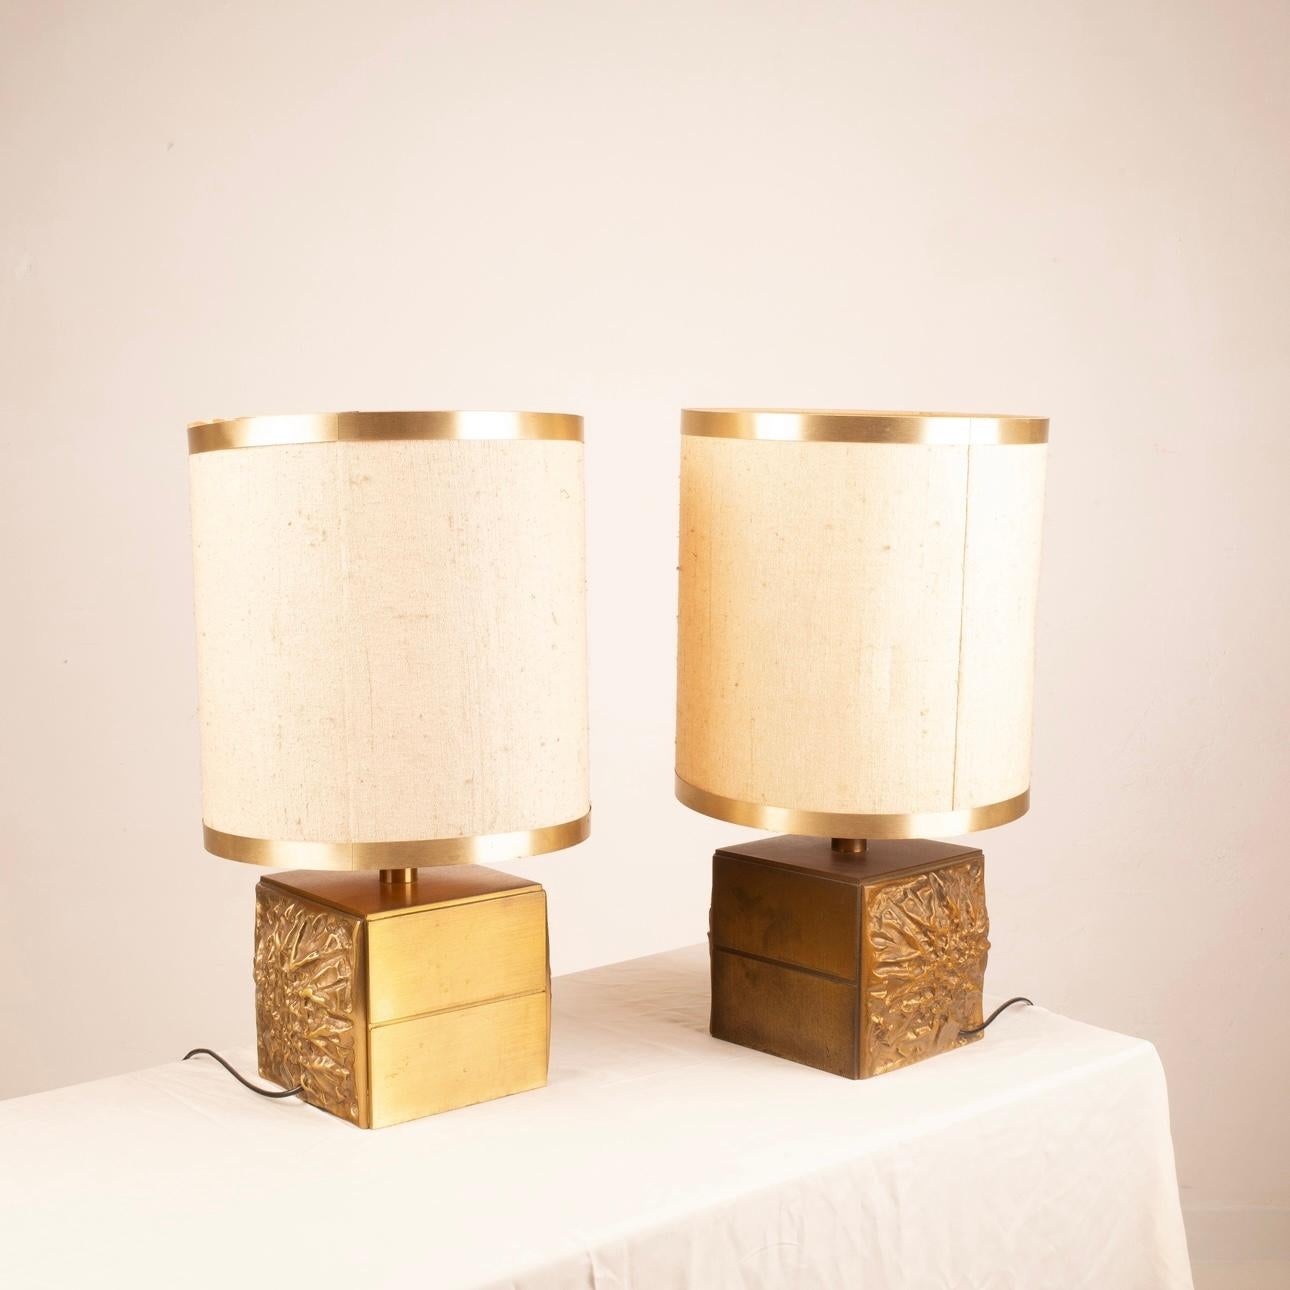 Pair of Brutalist Lamps by Luciano Frigerio for Frigerio of Desio For Sale 4